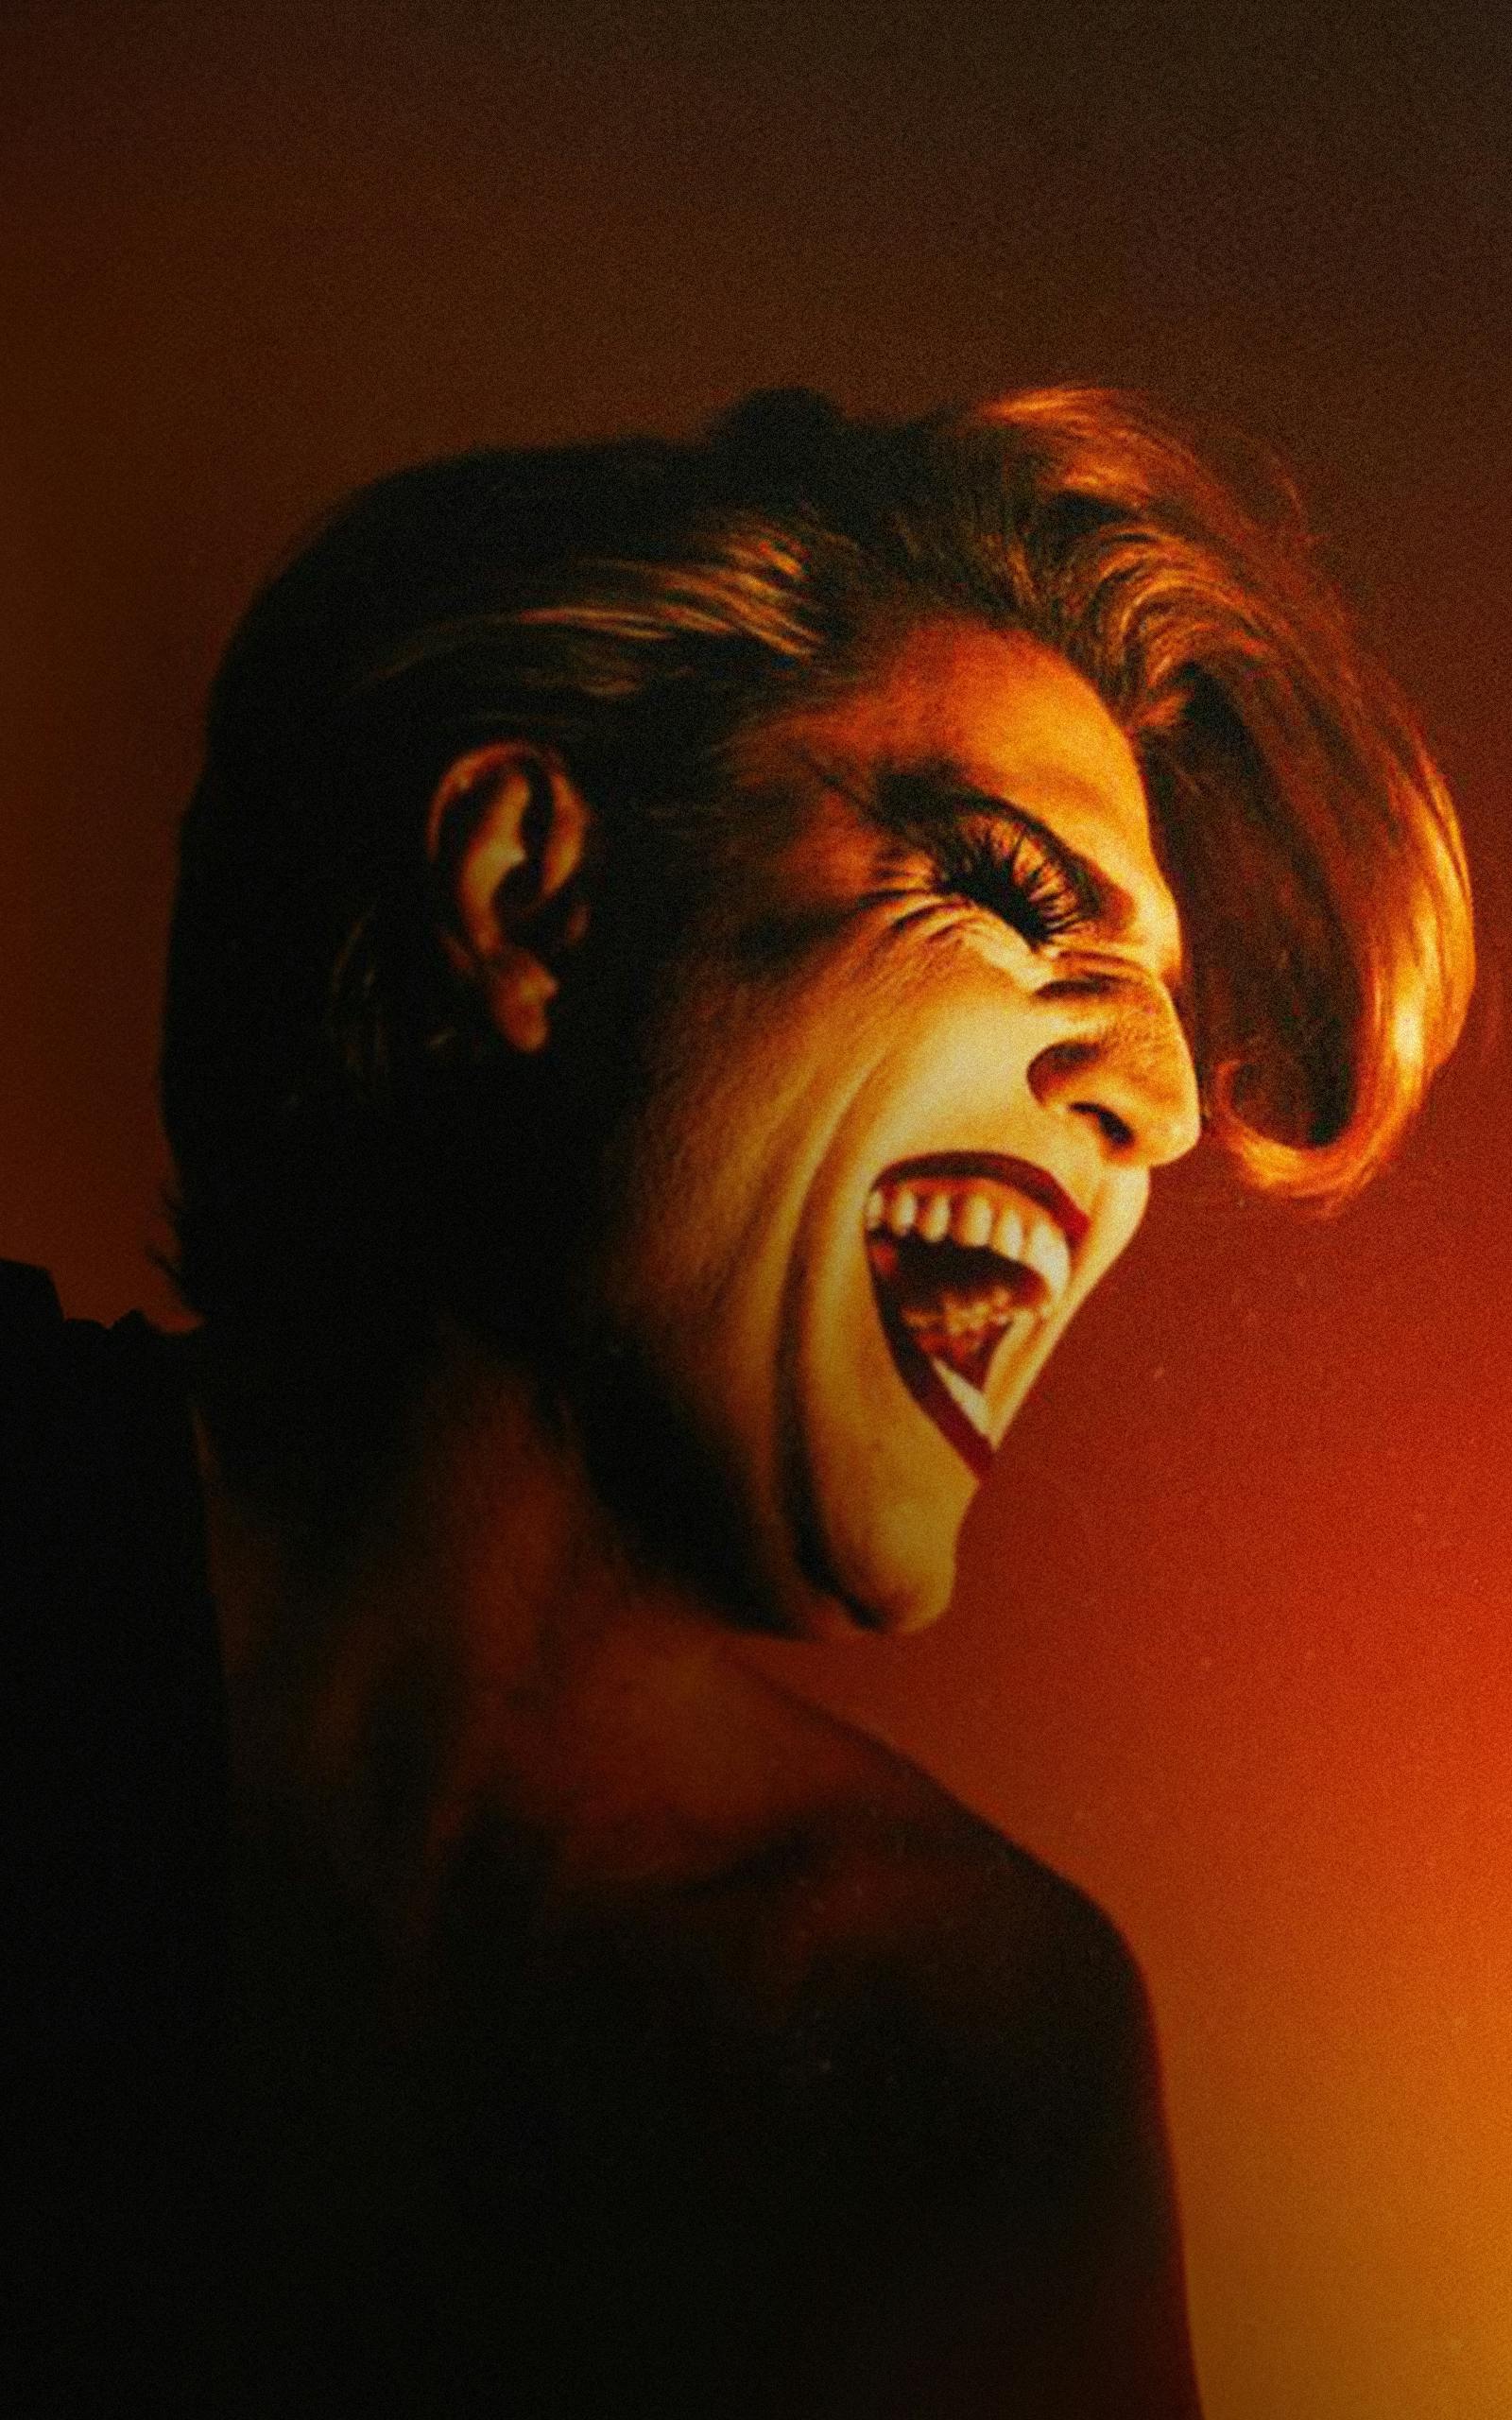 Comedian Reuben Kaye, wearing high contrast makeup and hair styled in a bonny quiff, laughs against a dramatic orange backdrop.